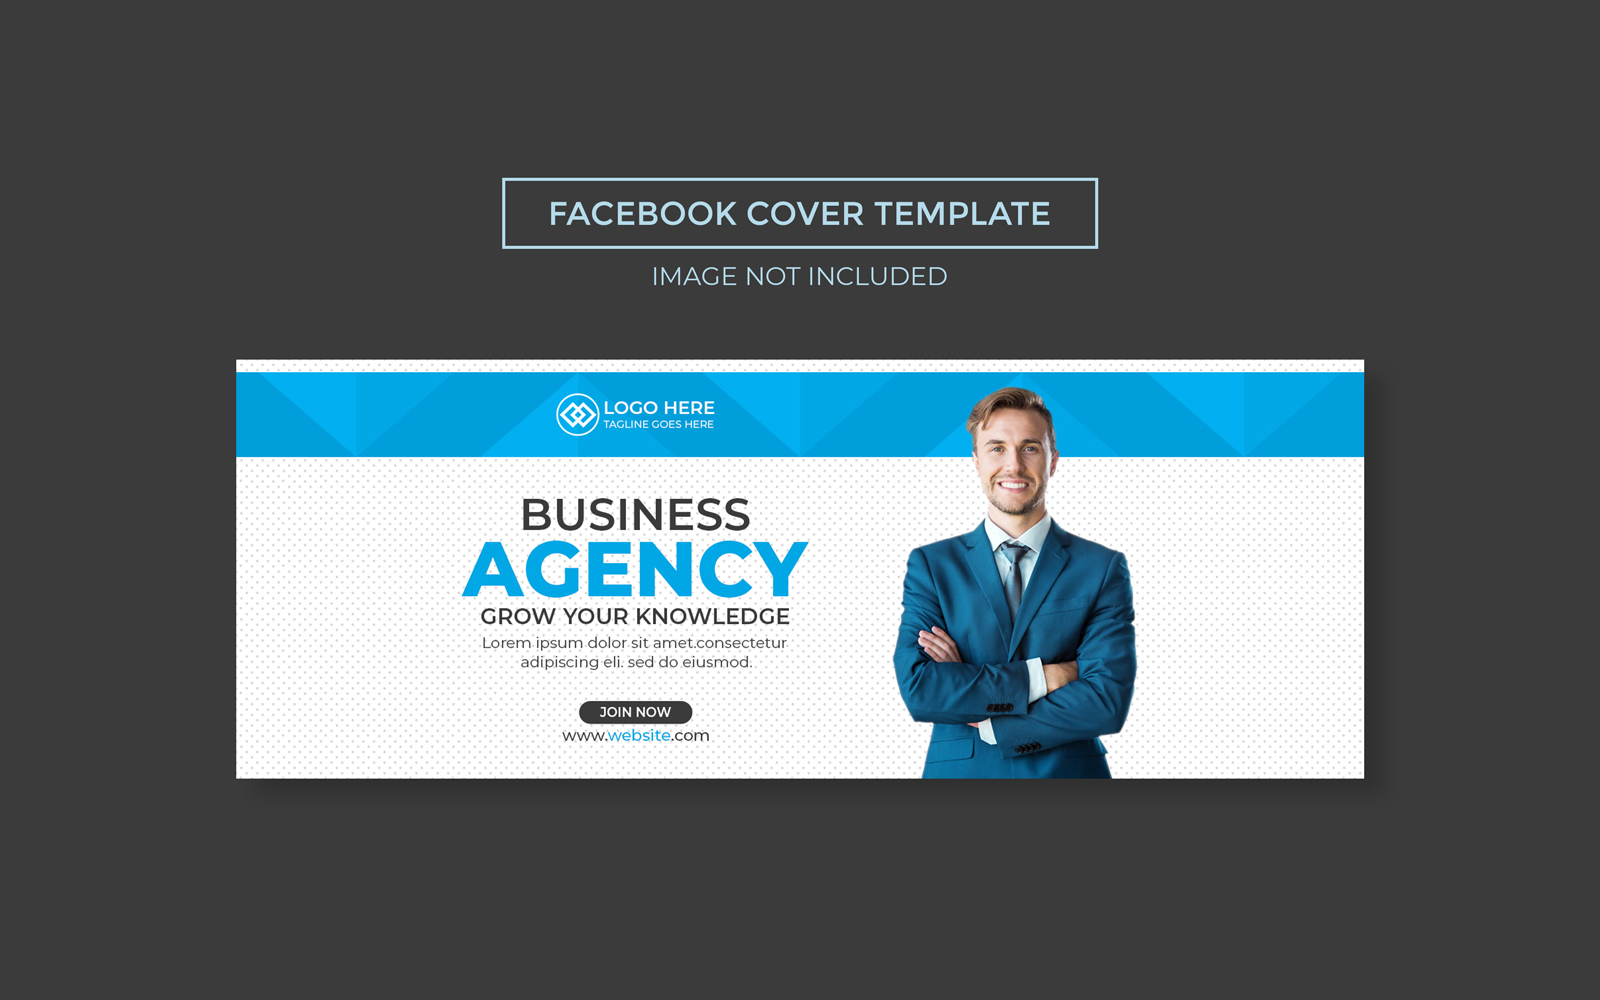 Geometric Facebook Cover Banner Template